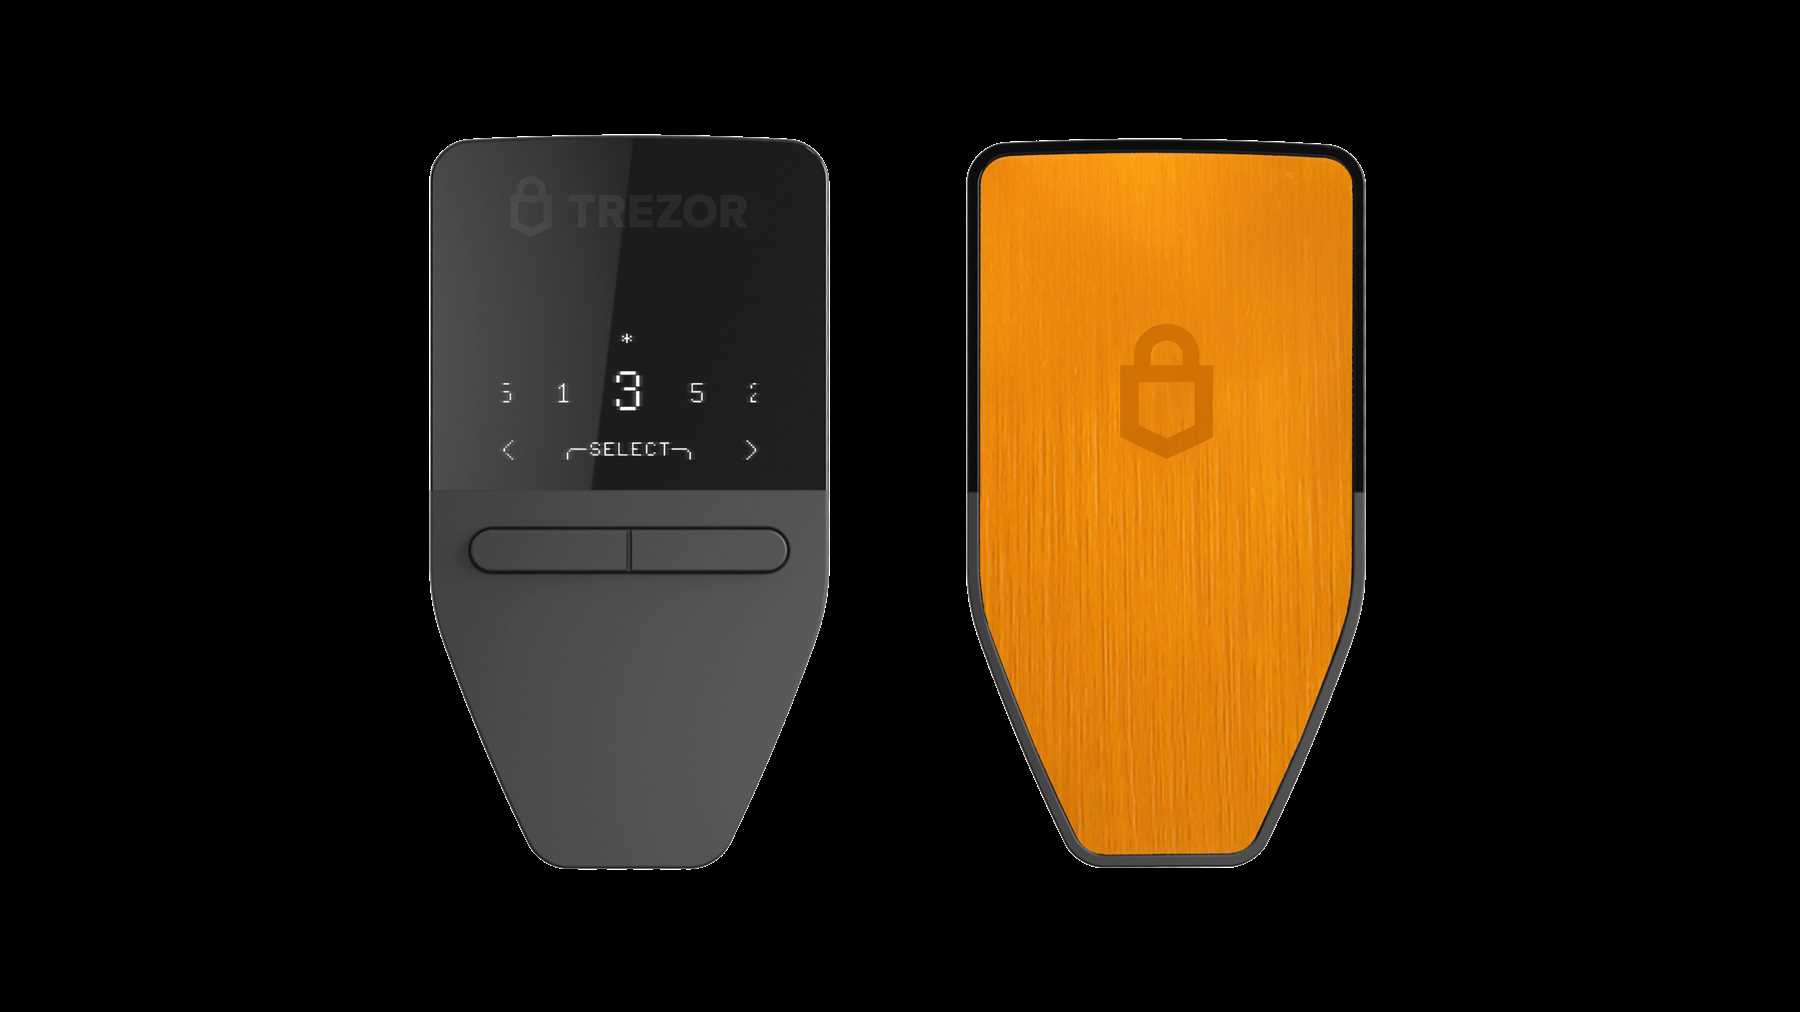 Final thoughts on using Trezor for cryptocurrency security